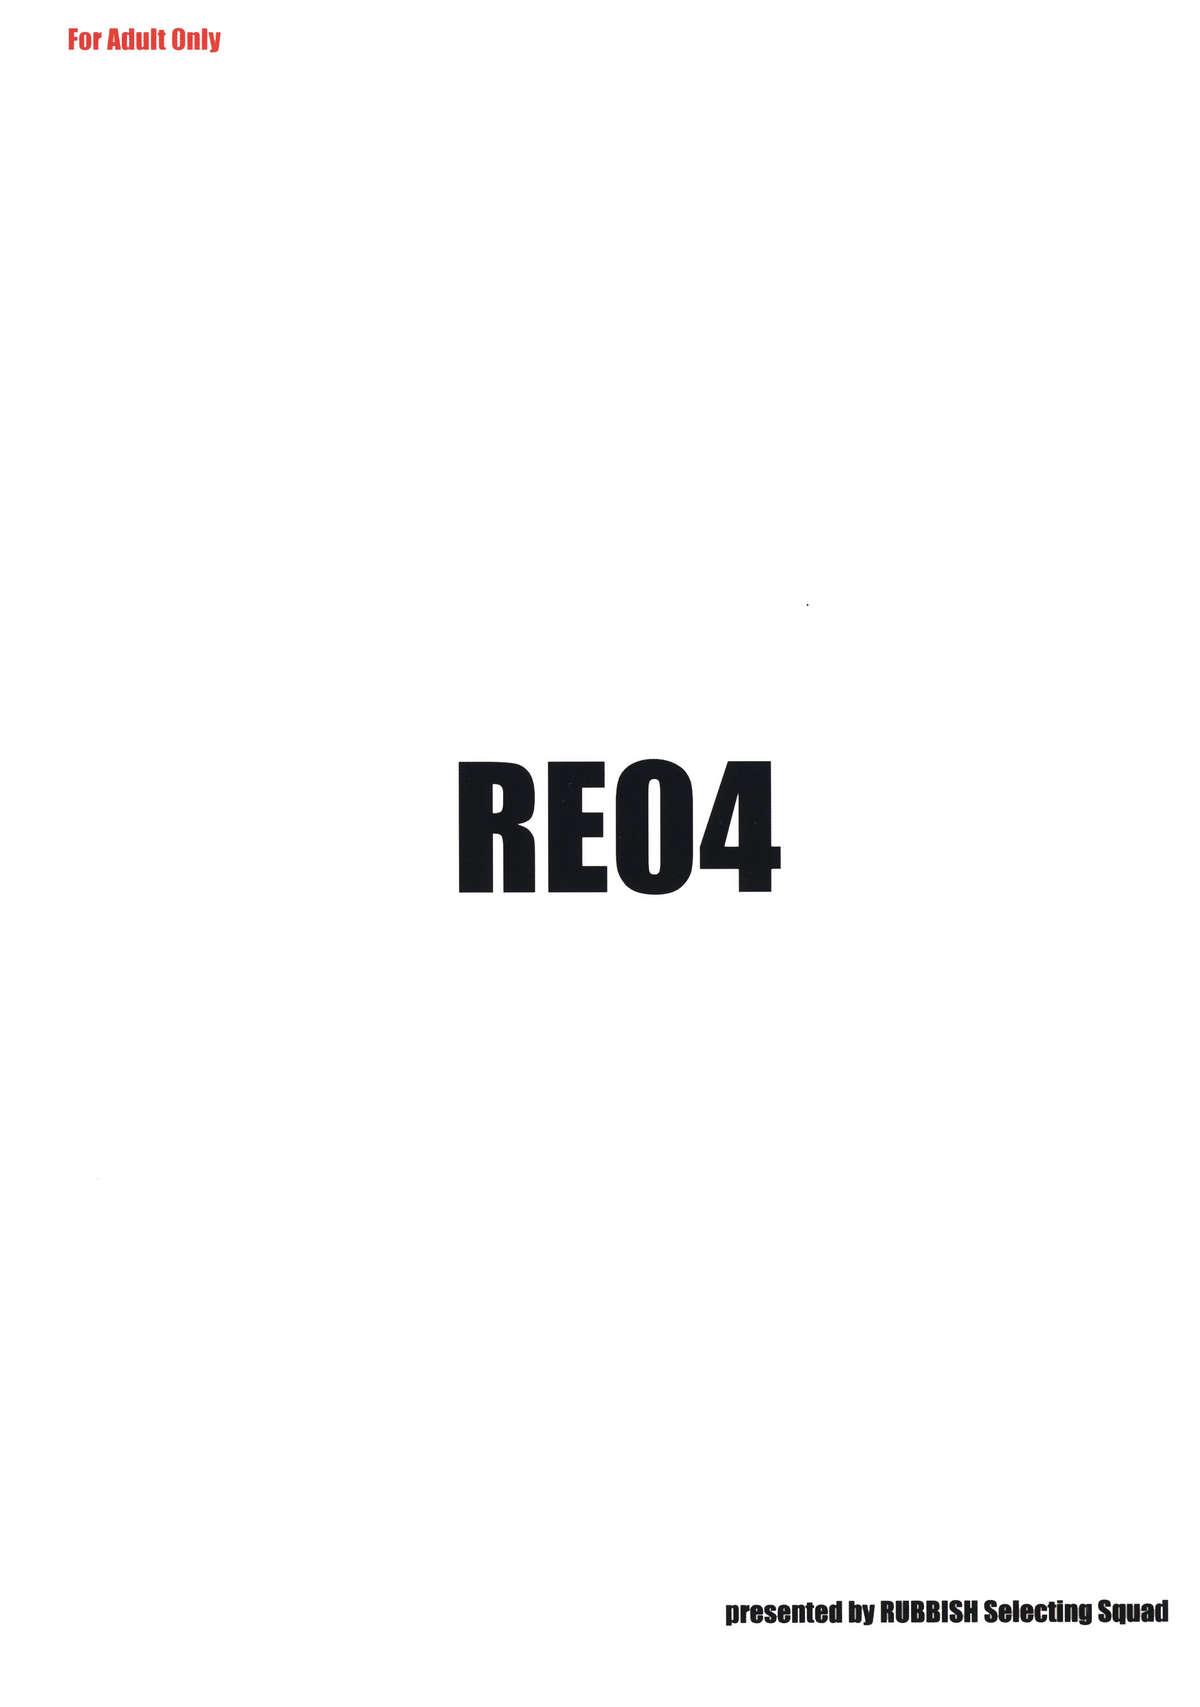 RE 04 29